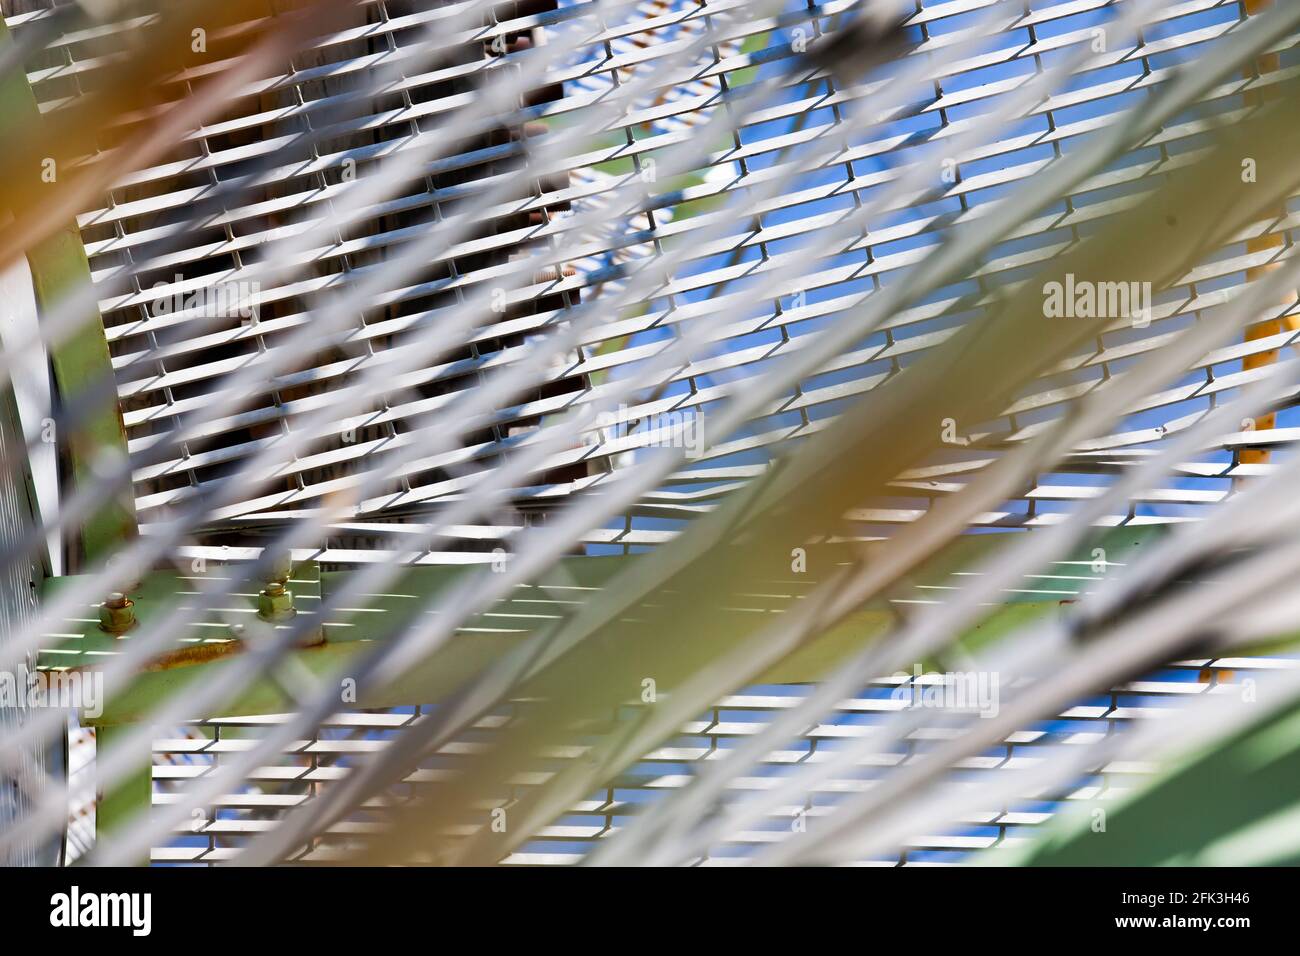 Abstract metal grid on oil processing plant. Oil distillation tower (refining column). Close-up. Focus on background. Stock Photo